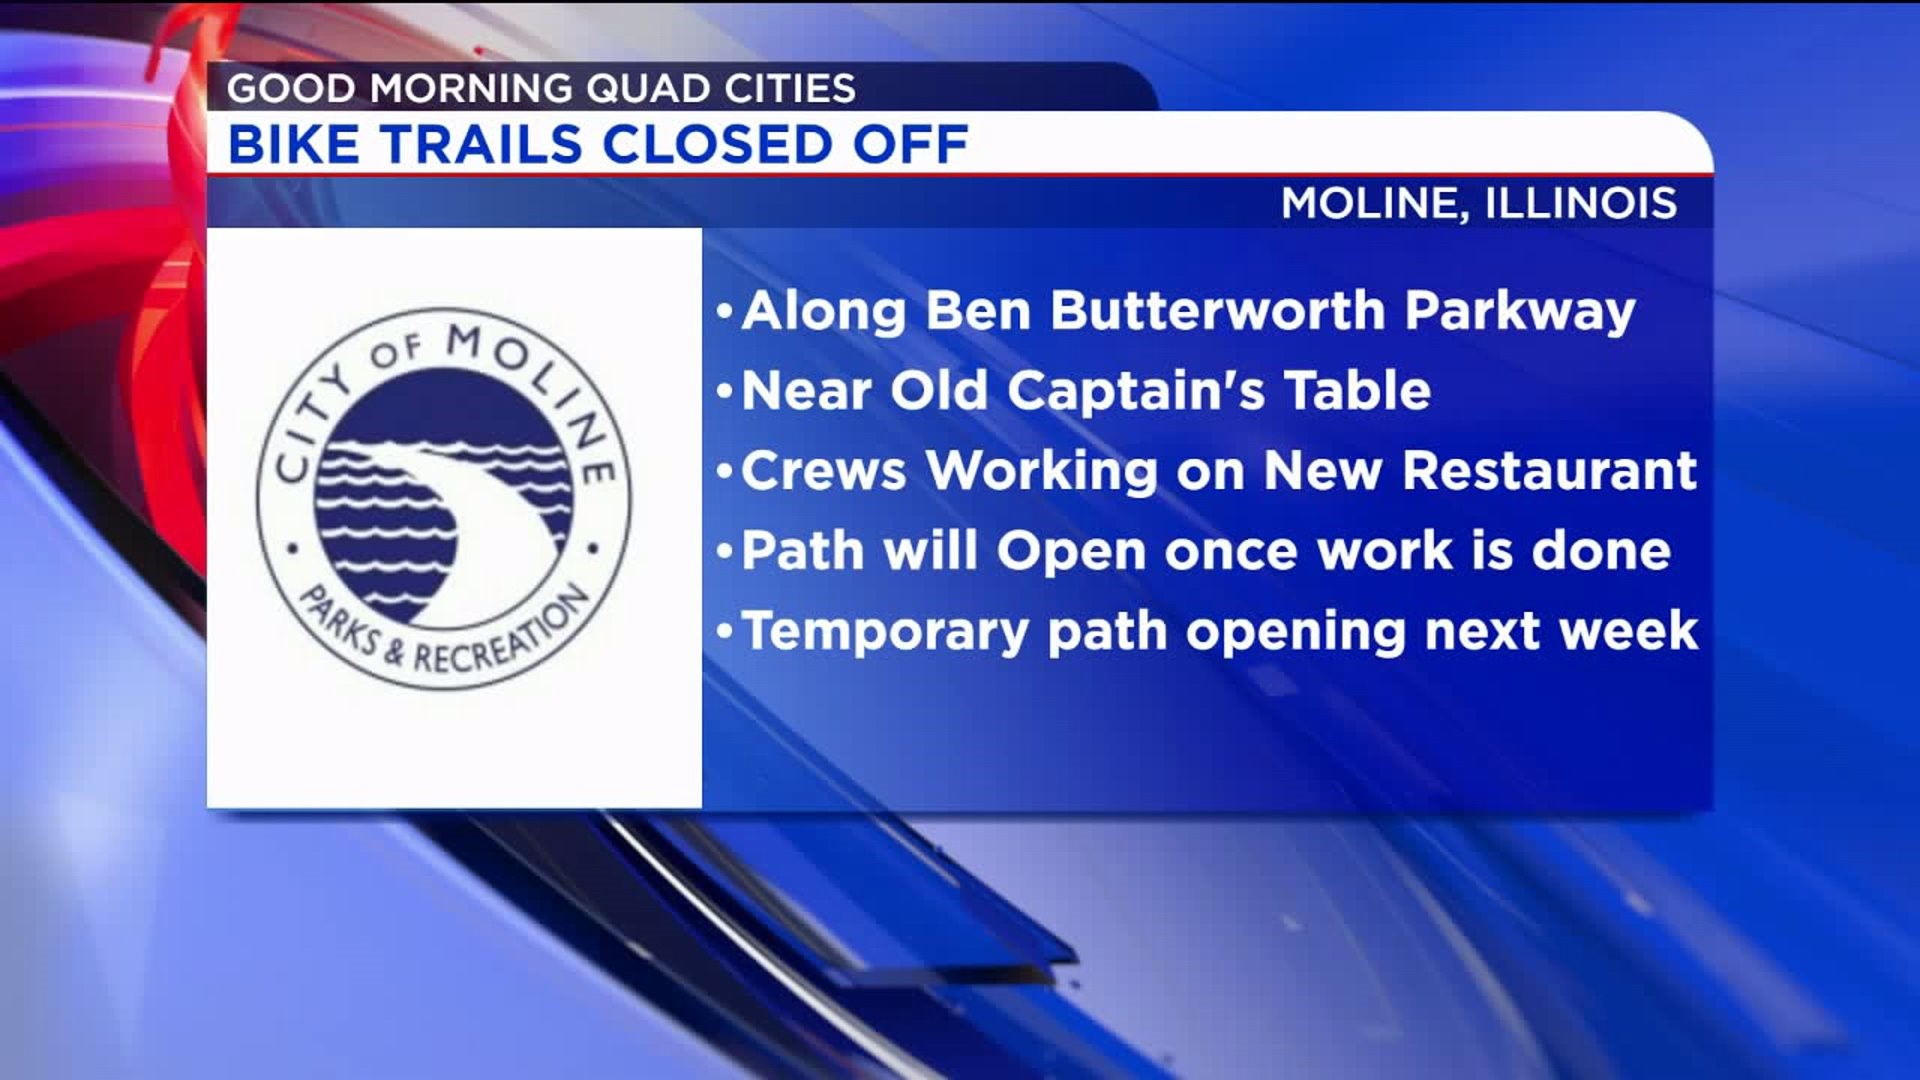 Trail along Ben Butterworth Parkway to close temporarily